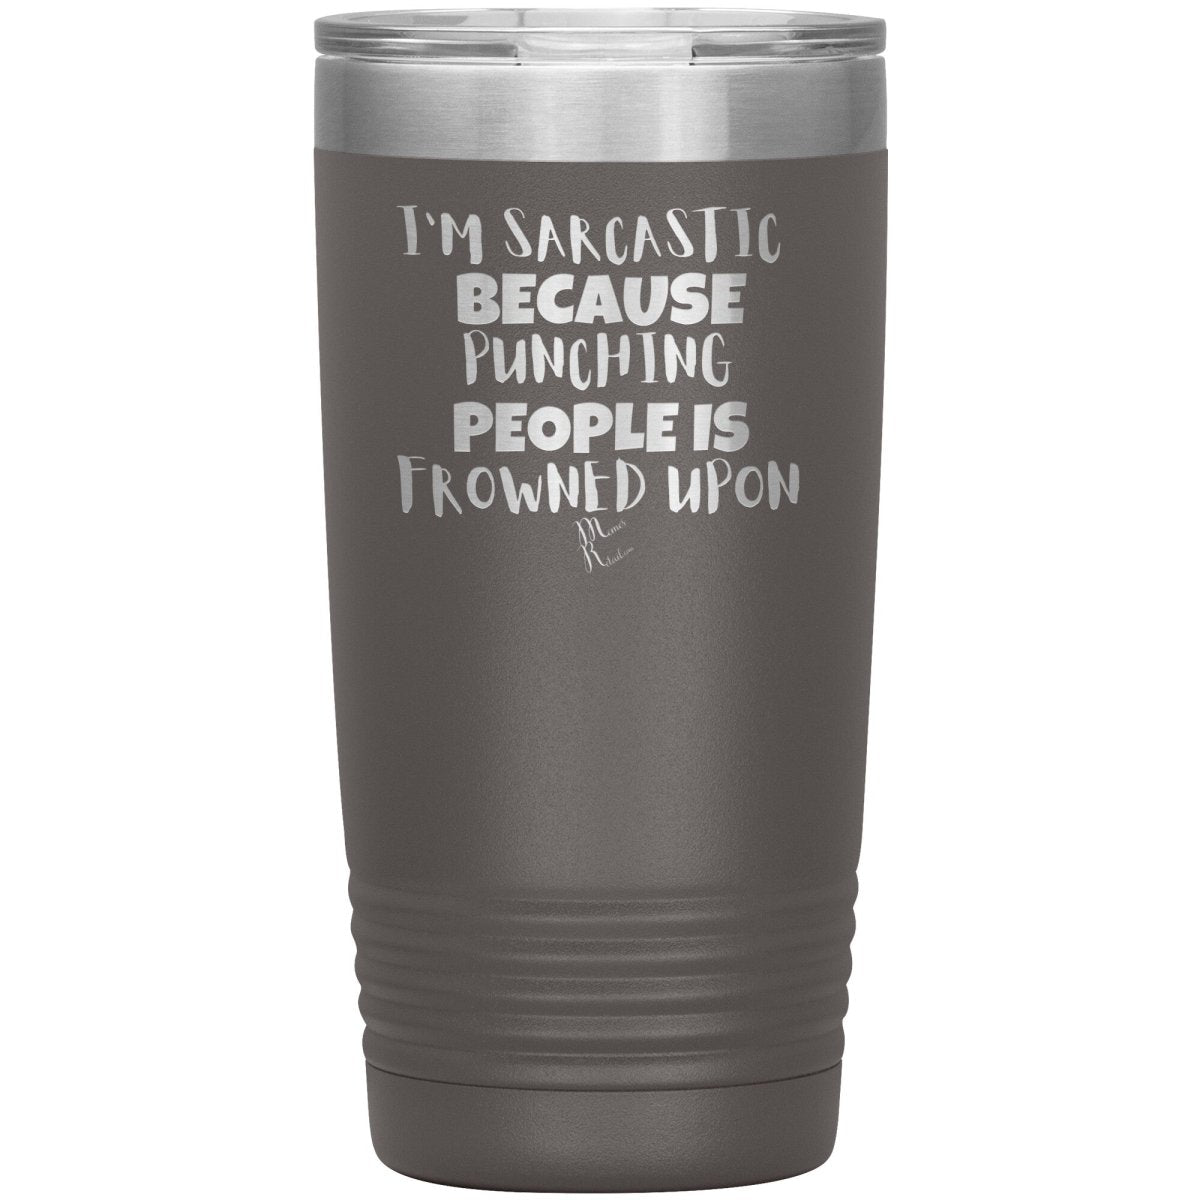 I'm Sarcastic Because Punching People is Frowned Upon Tumblers, 20oz Insulated Tumbler / Pewter - MemesRetail.com